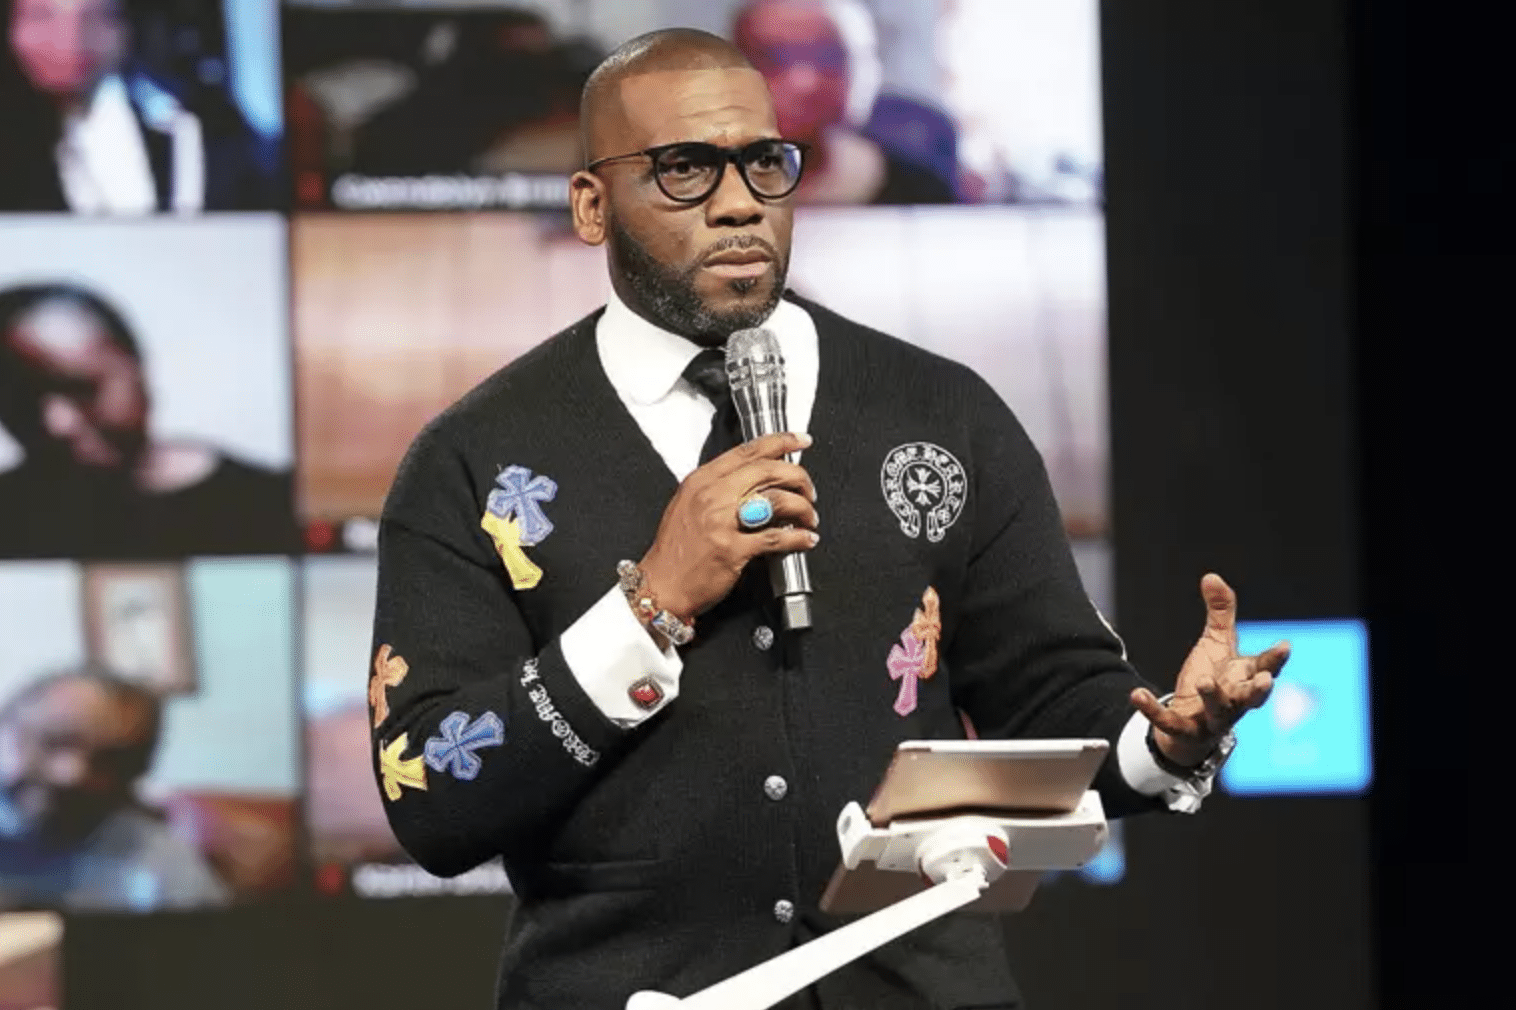 (WATCH) Pastor Jamal Bryant claims Jesus was wrong 85% of His life